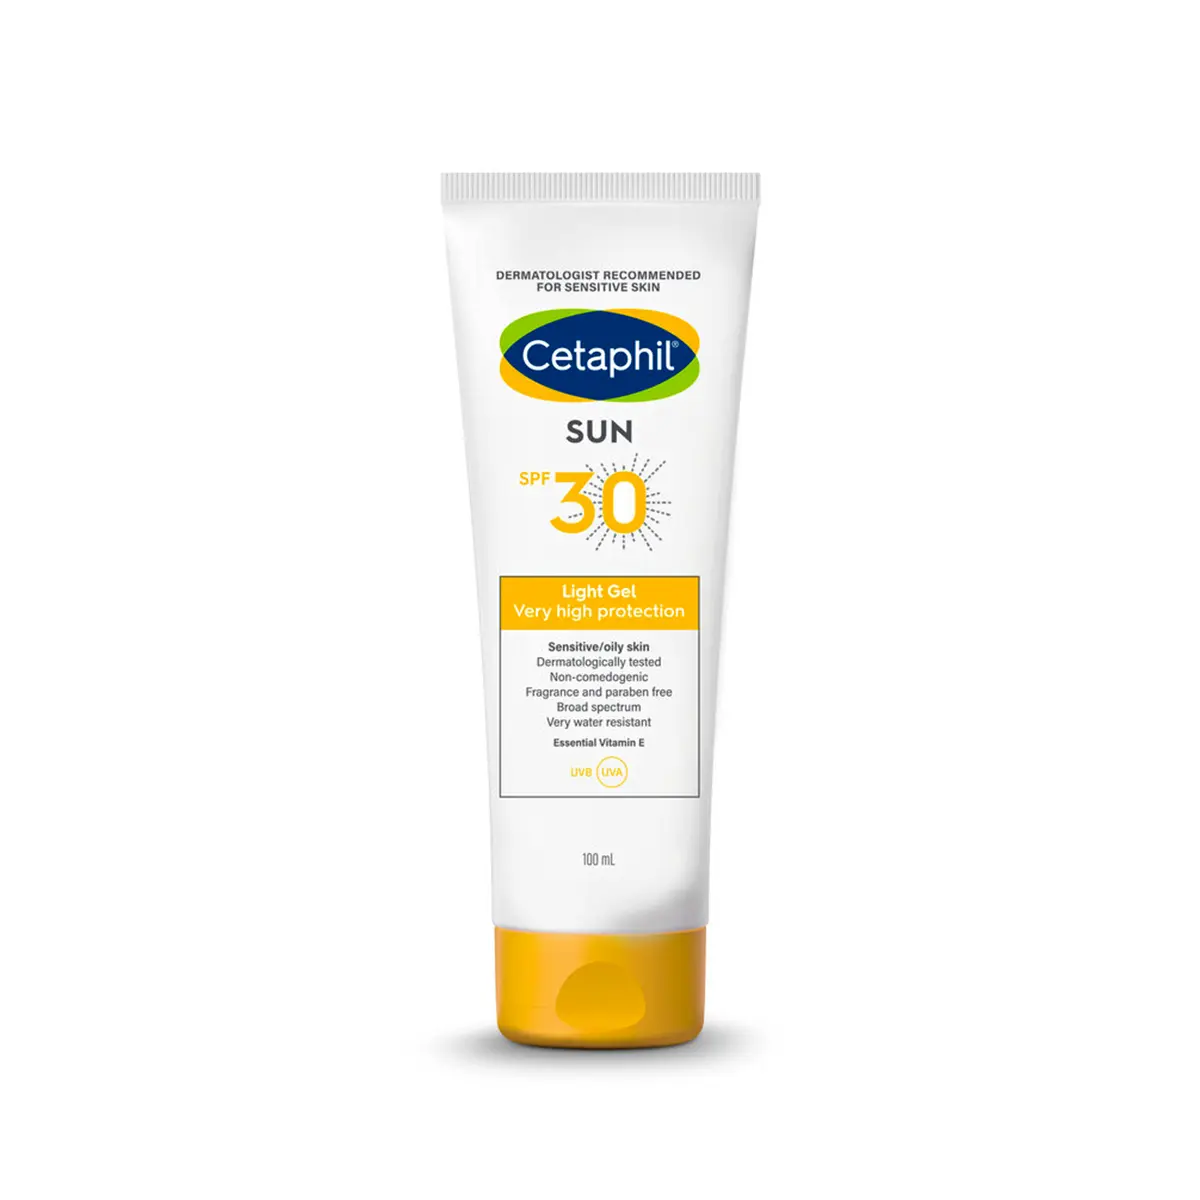 First product image of Cetaphil SUN SPF 30+ GEL 100ml